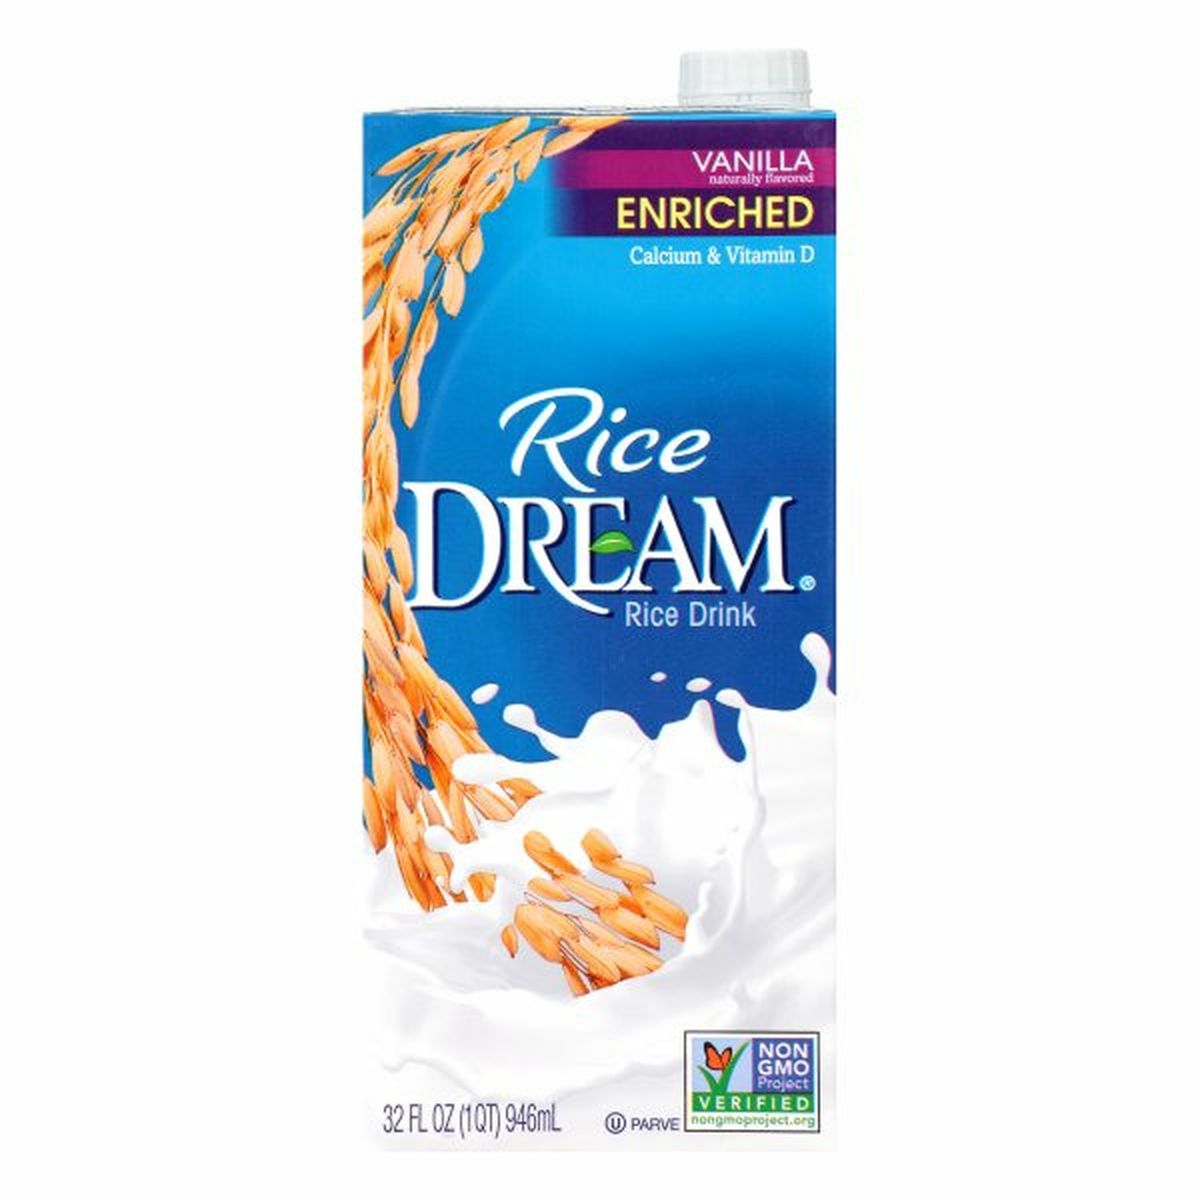 Calories in Rice DREAM Rice Drink, Enriched, Vanilla